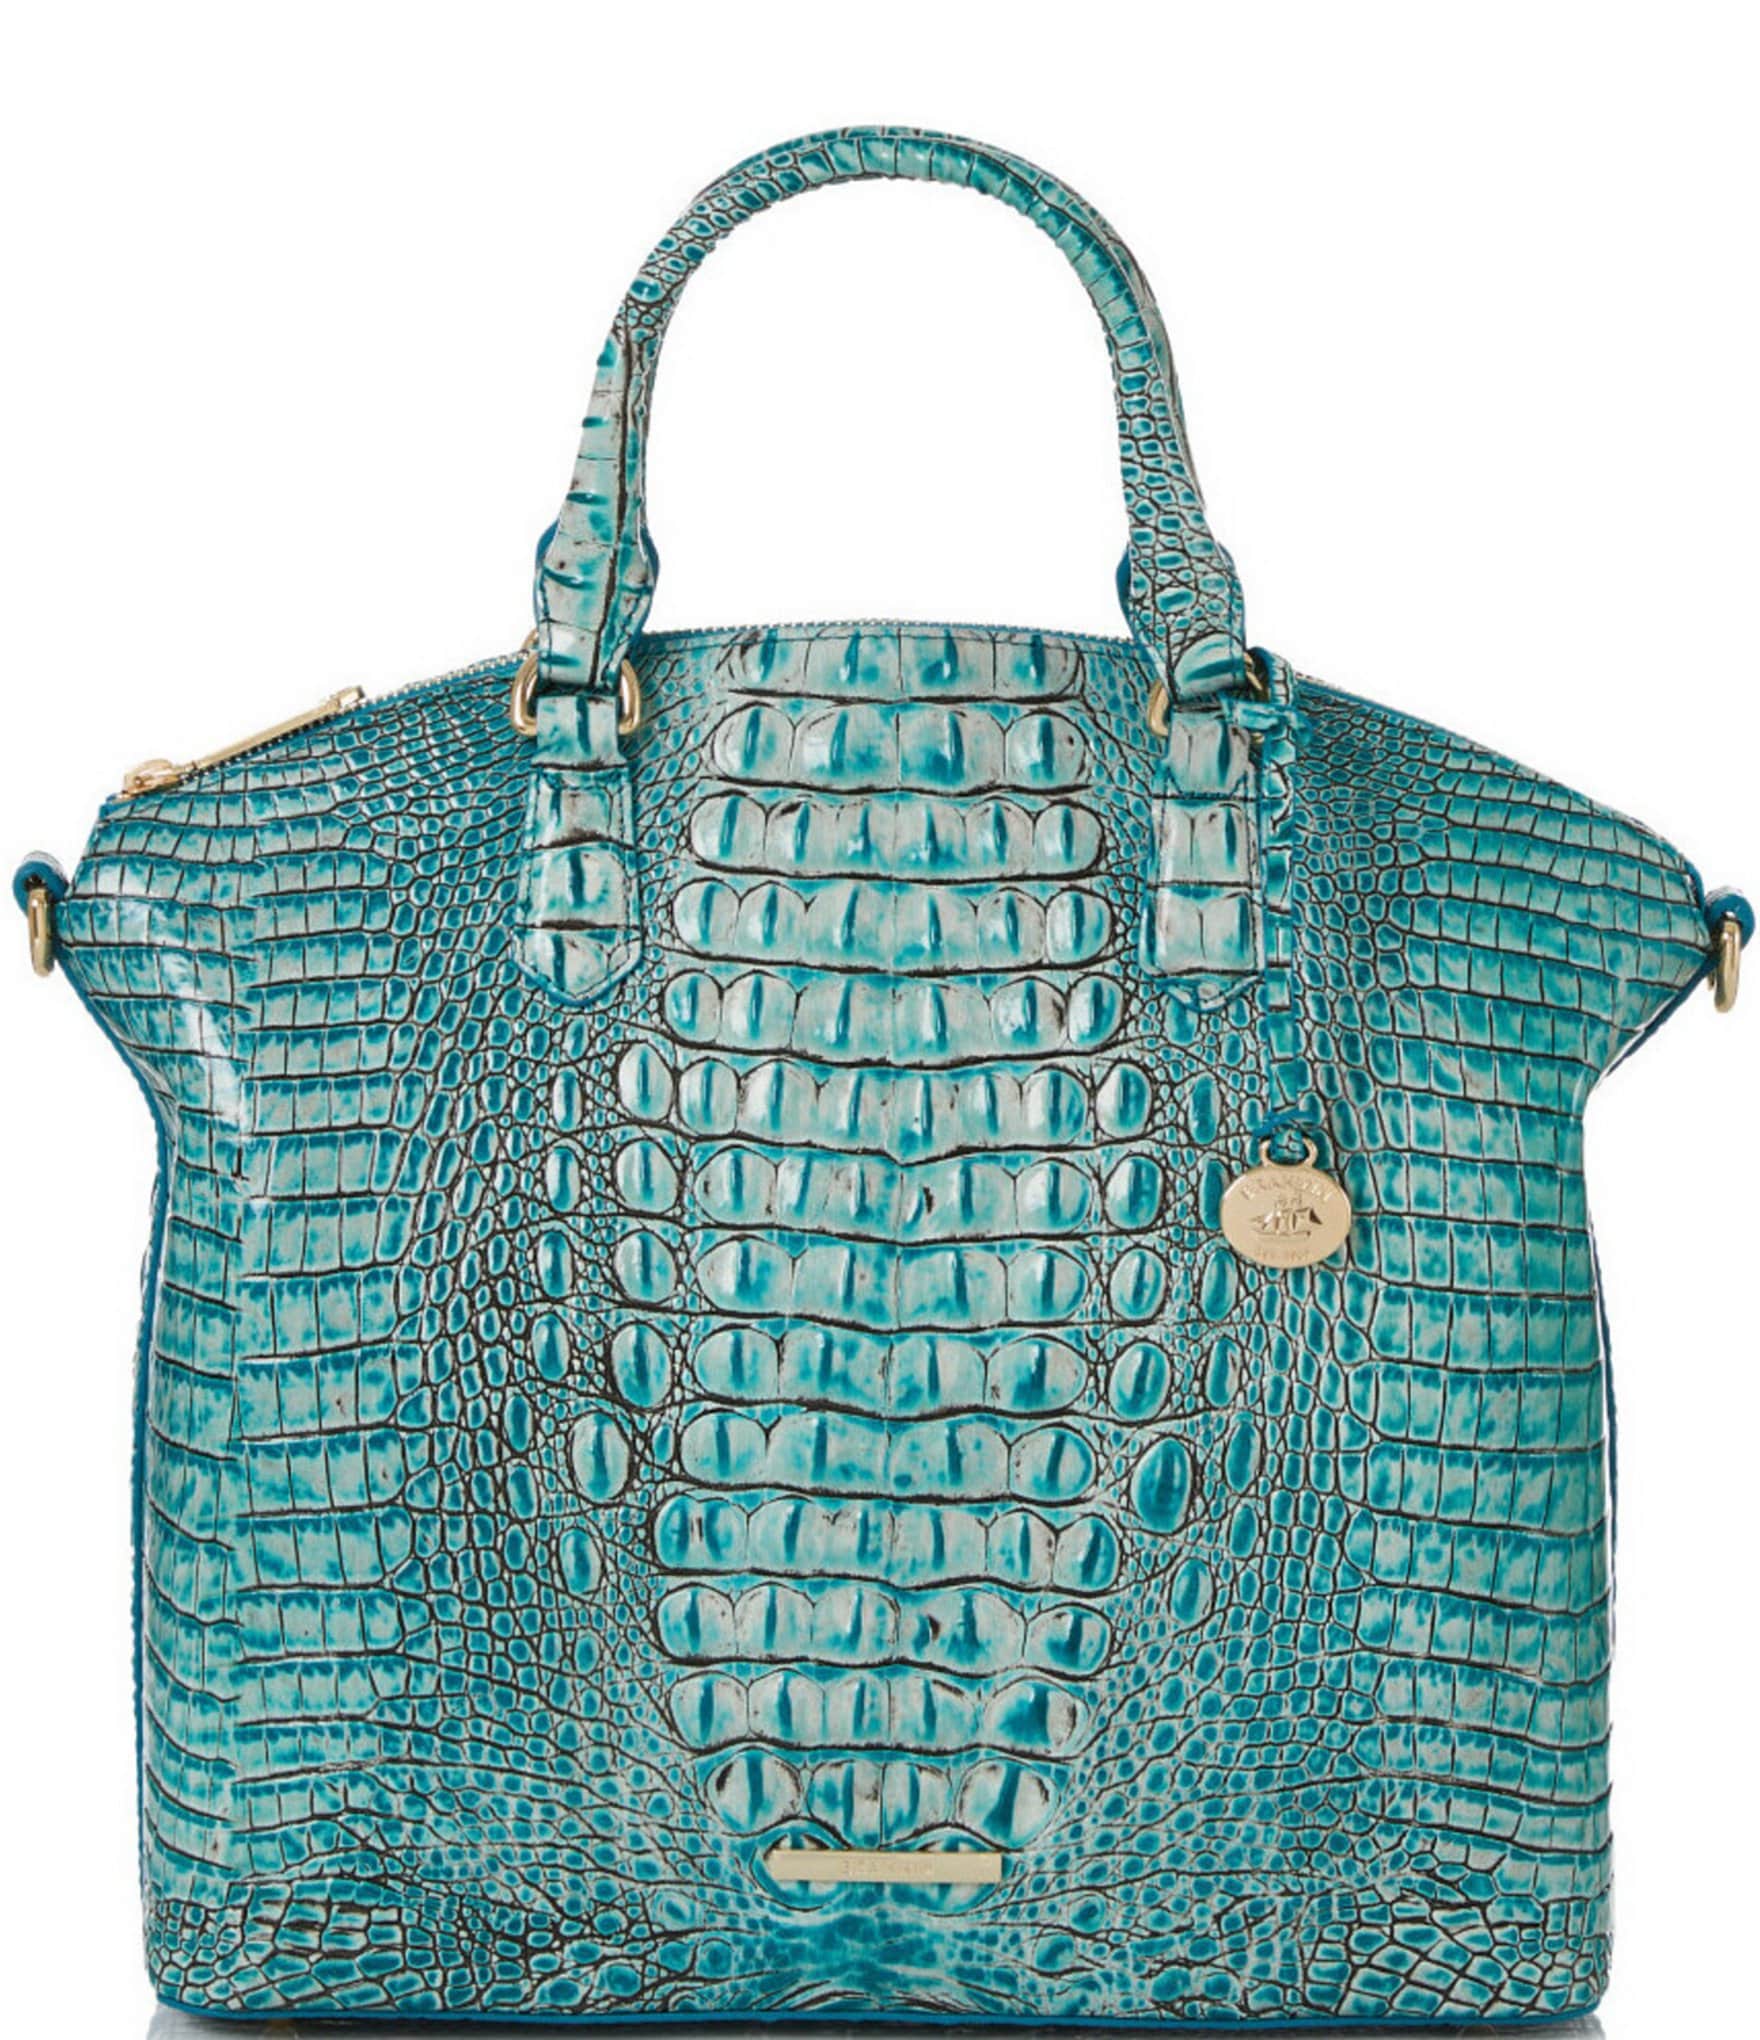 BRAHMIN Ombre Melbourne Collection Large Crocodile-Embossed